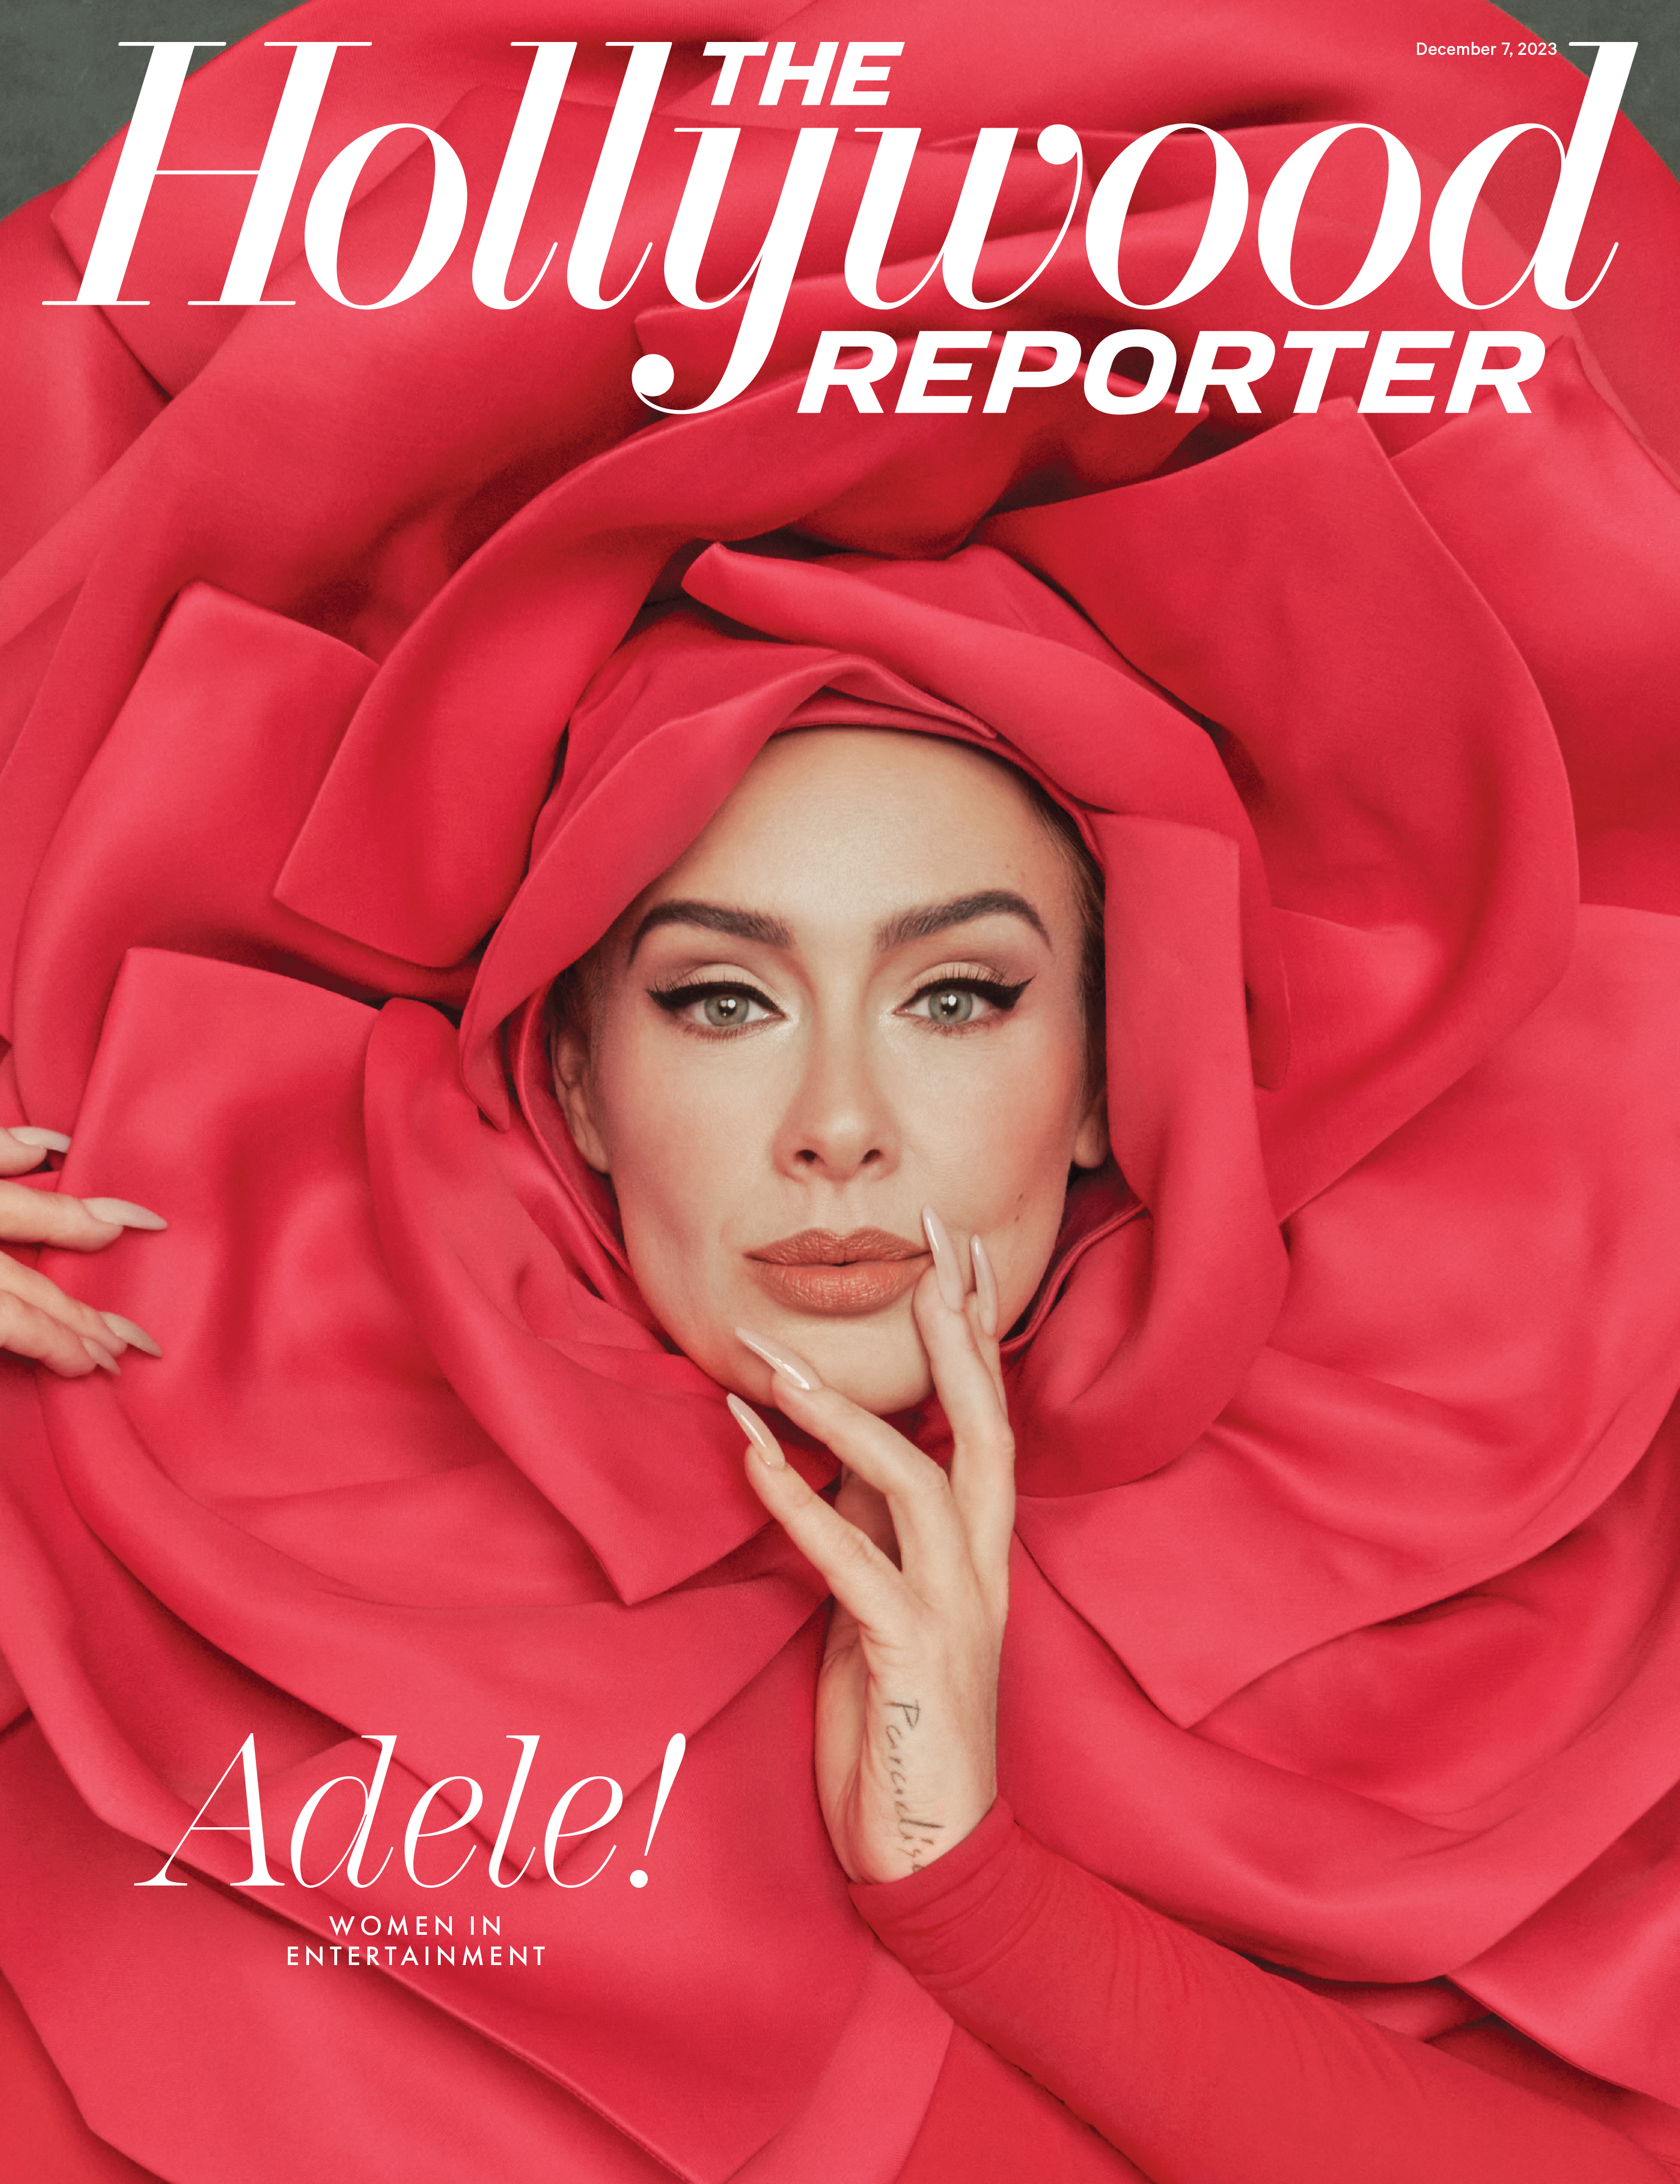 The Hollywood Reporter - “Adele!,” December 7, 2023